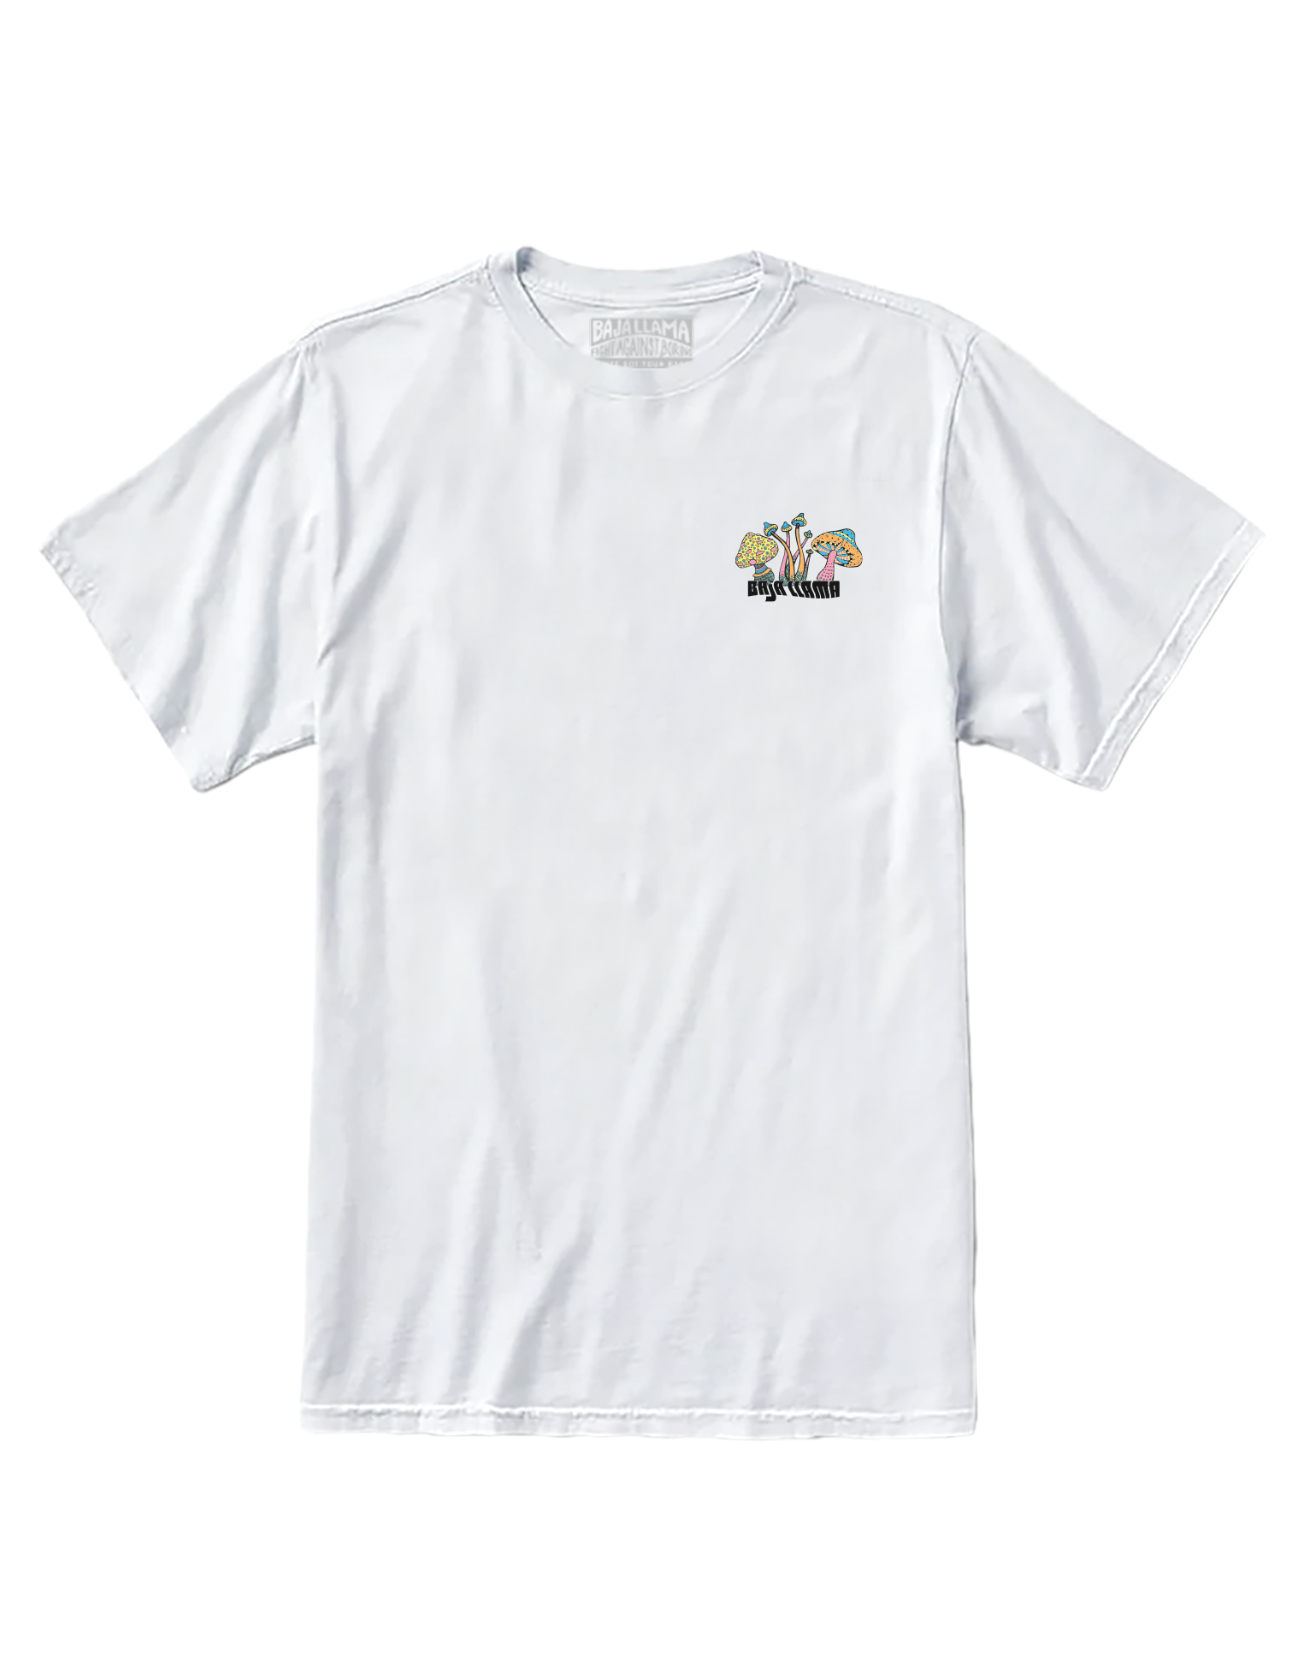 A TRIP OF A LIFETIME  - WHITE  PRIMO GRAPHIC TEE